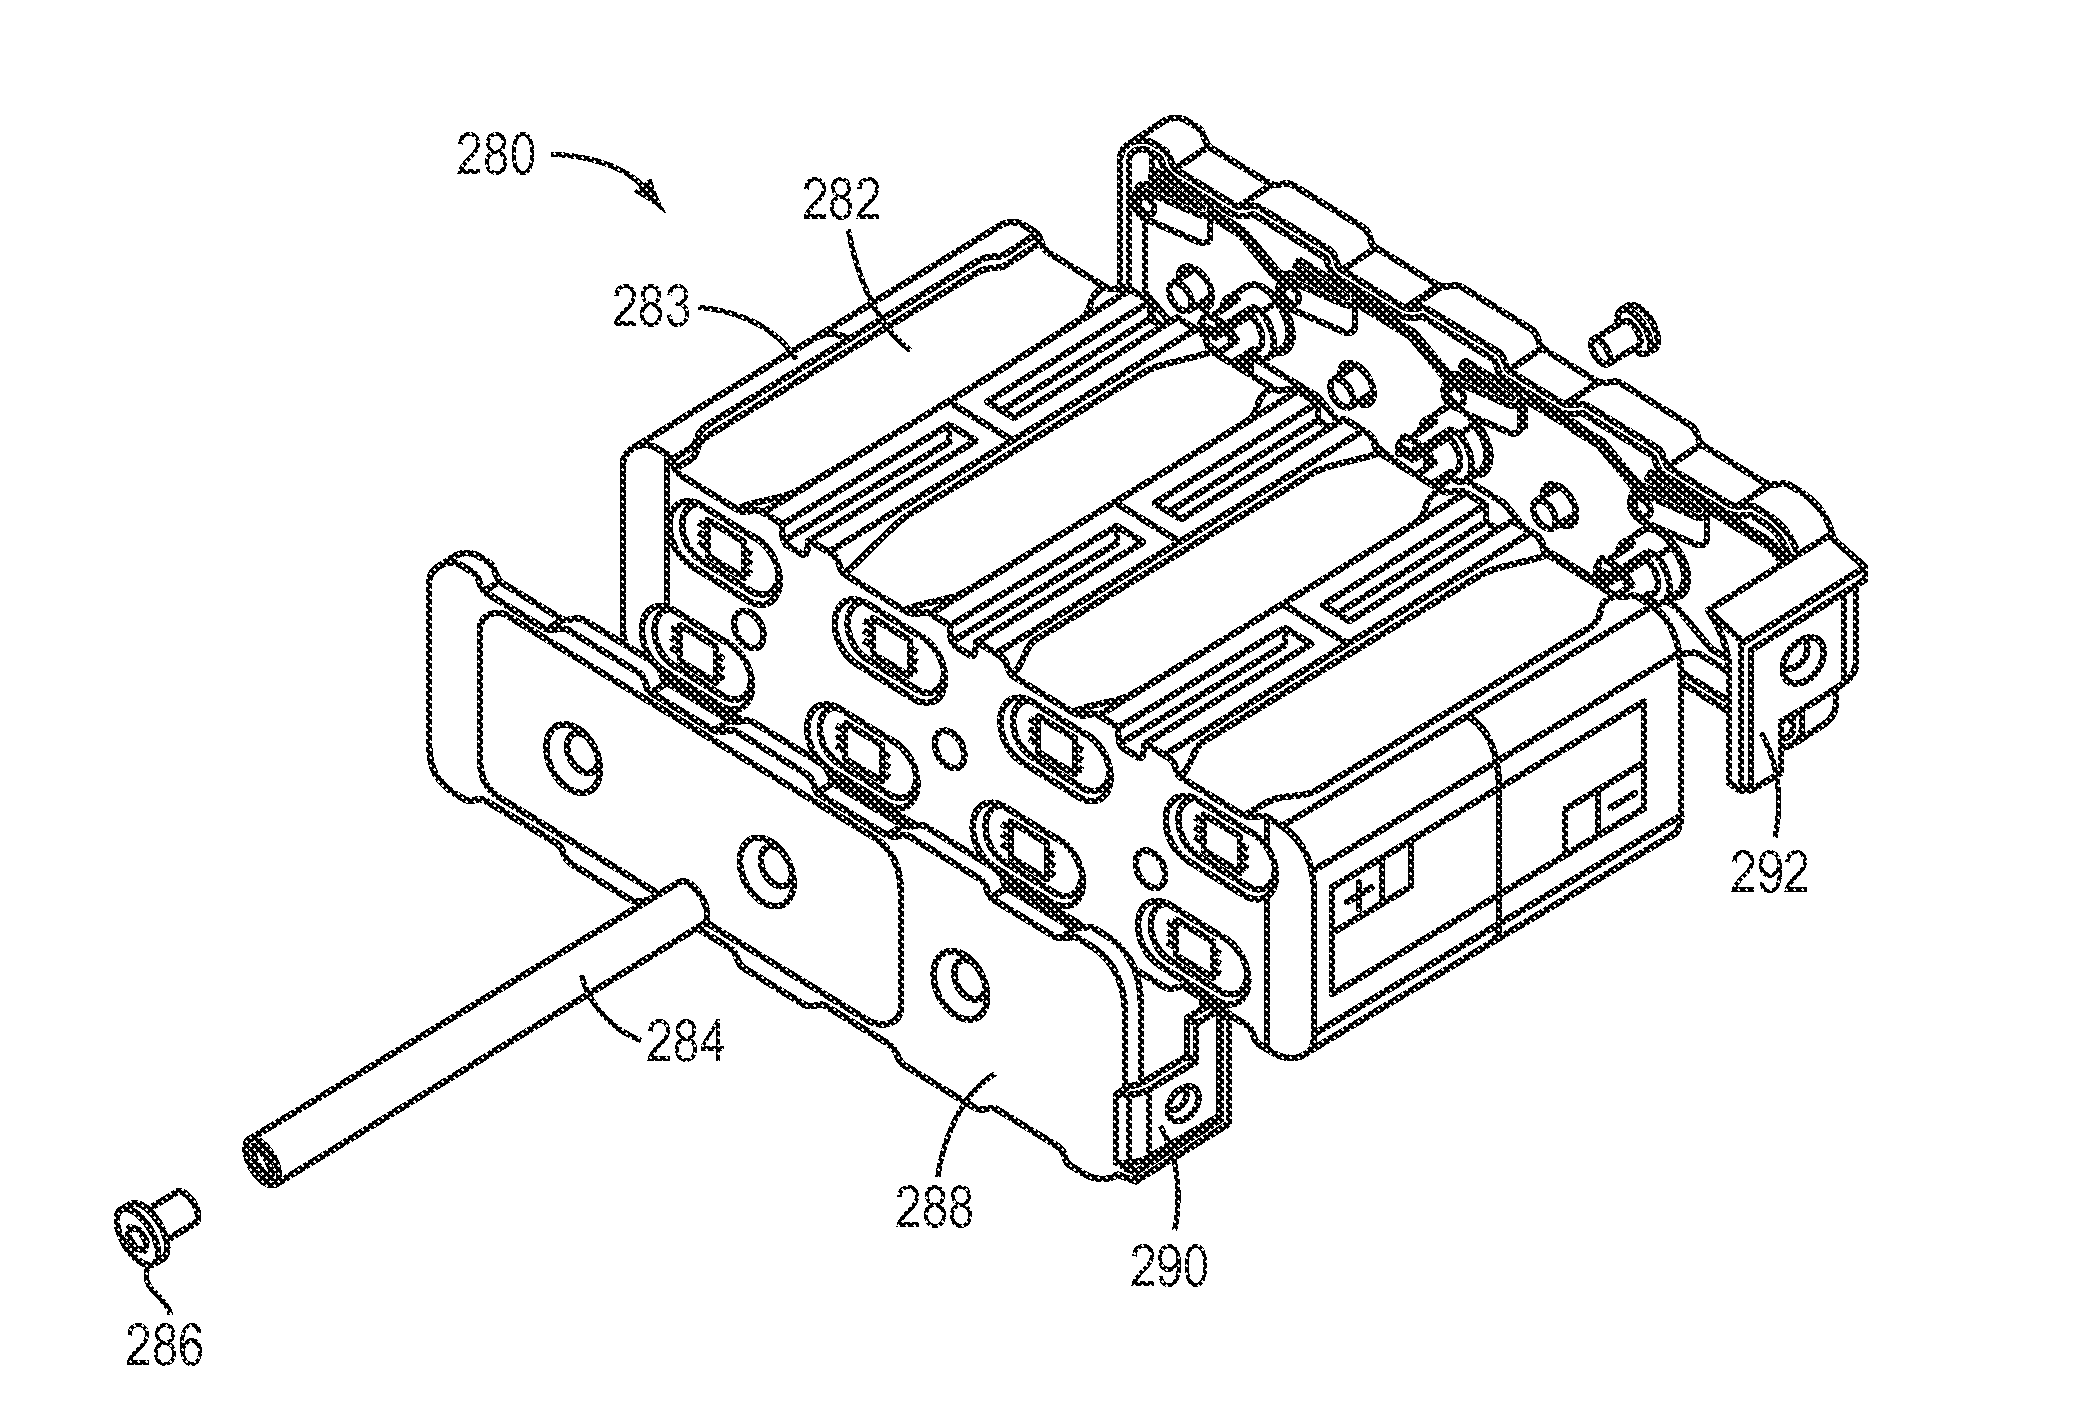 Modular battery system and components